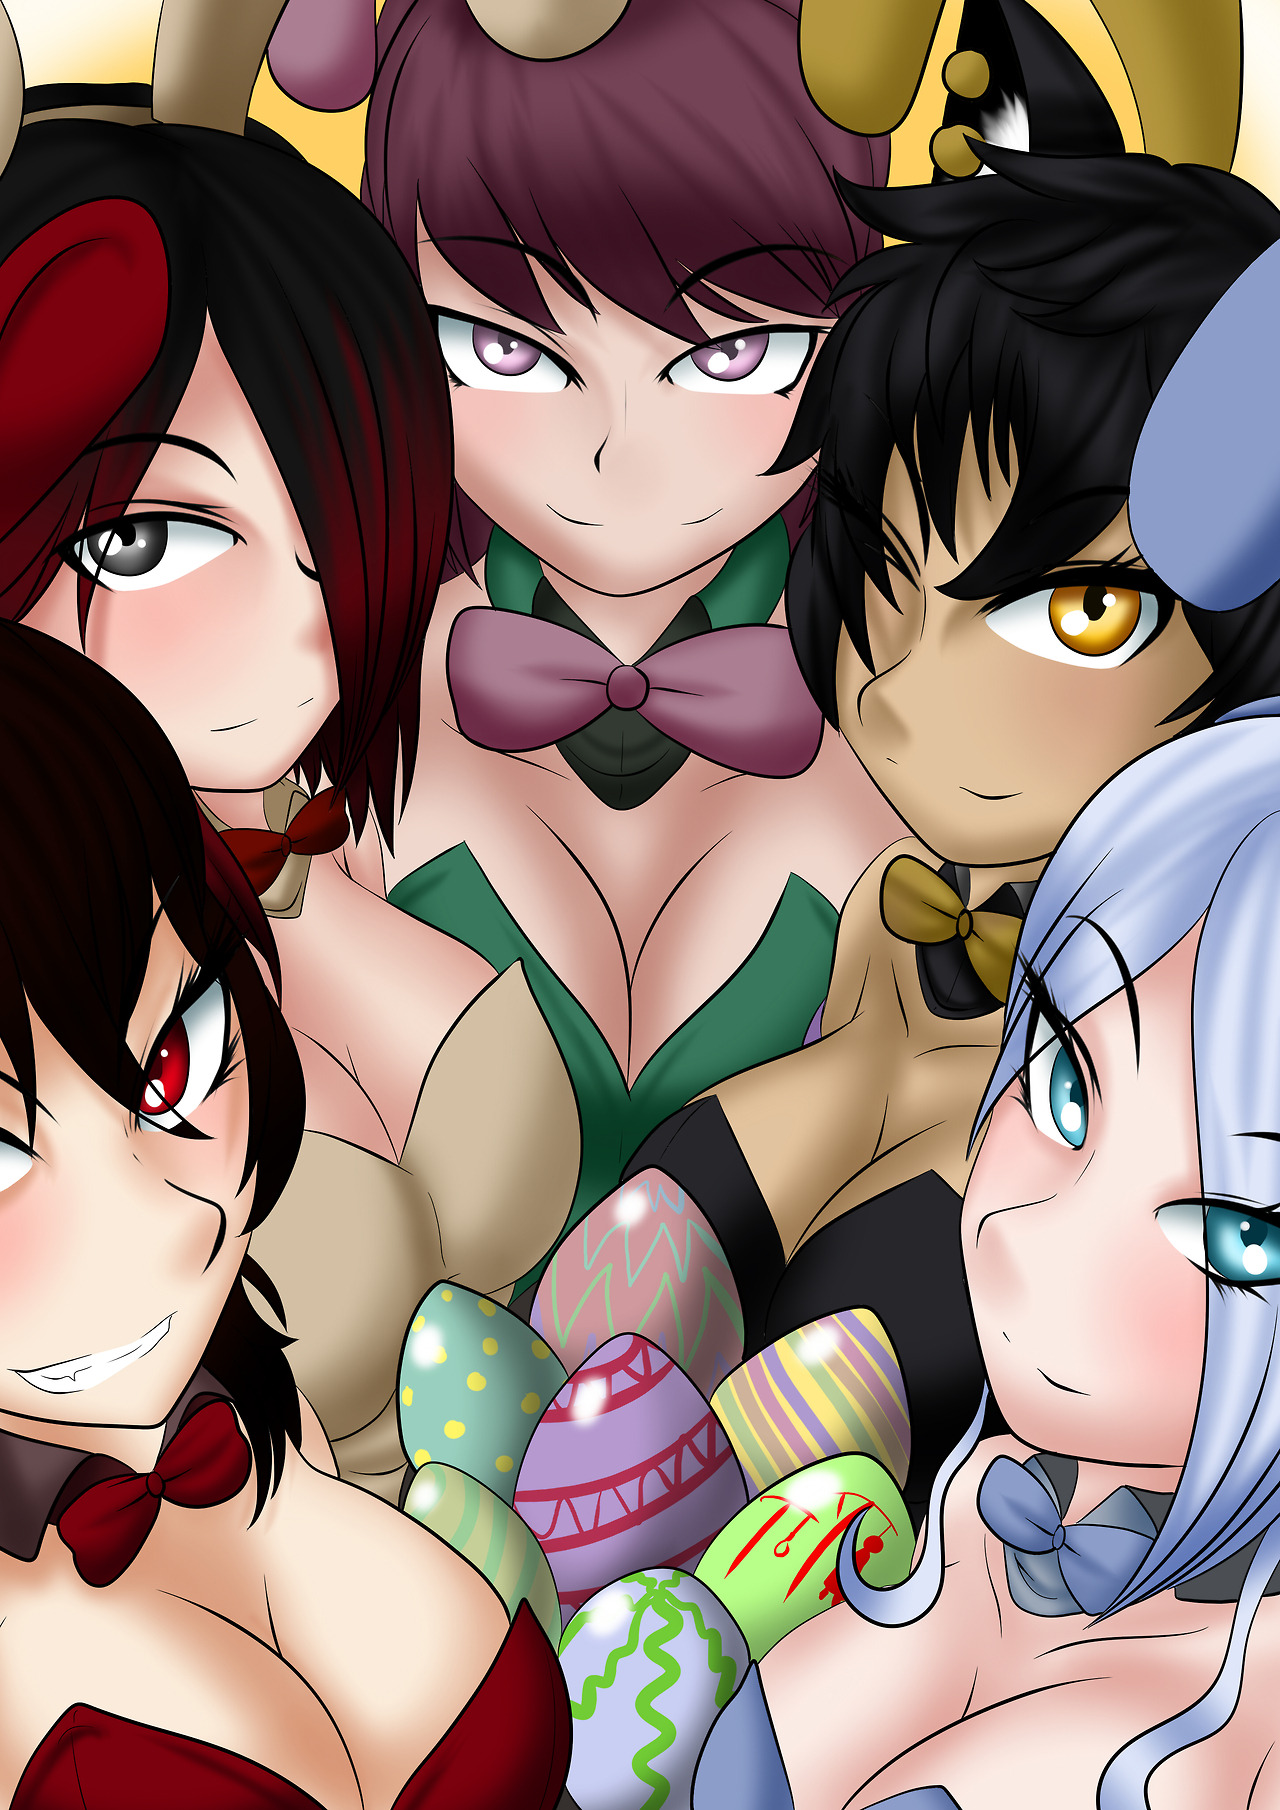 happy easter 3 : the milf of rwbygrab those eggplease support me on patreon if you